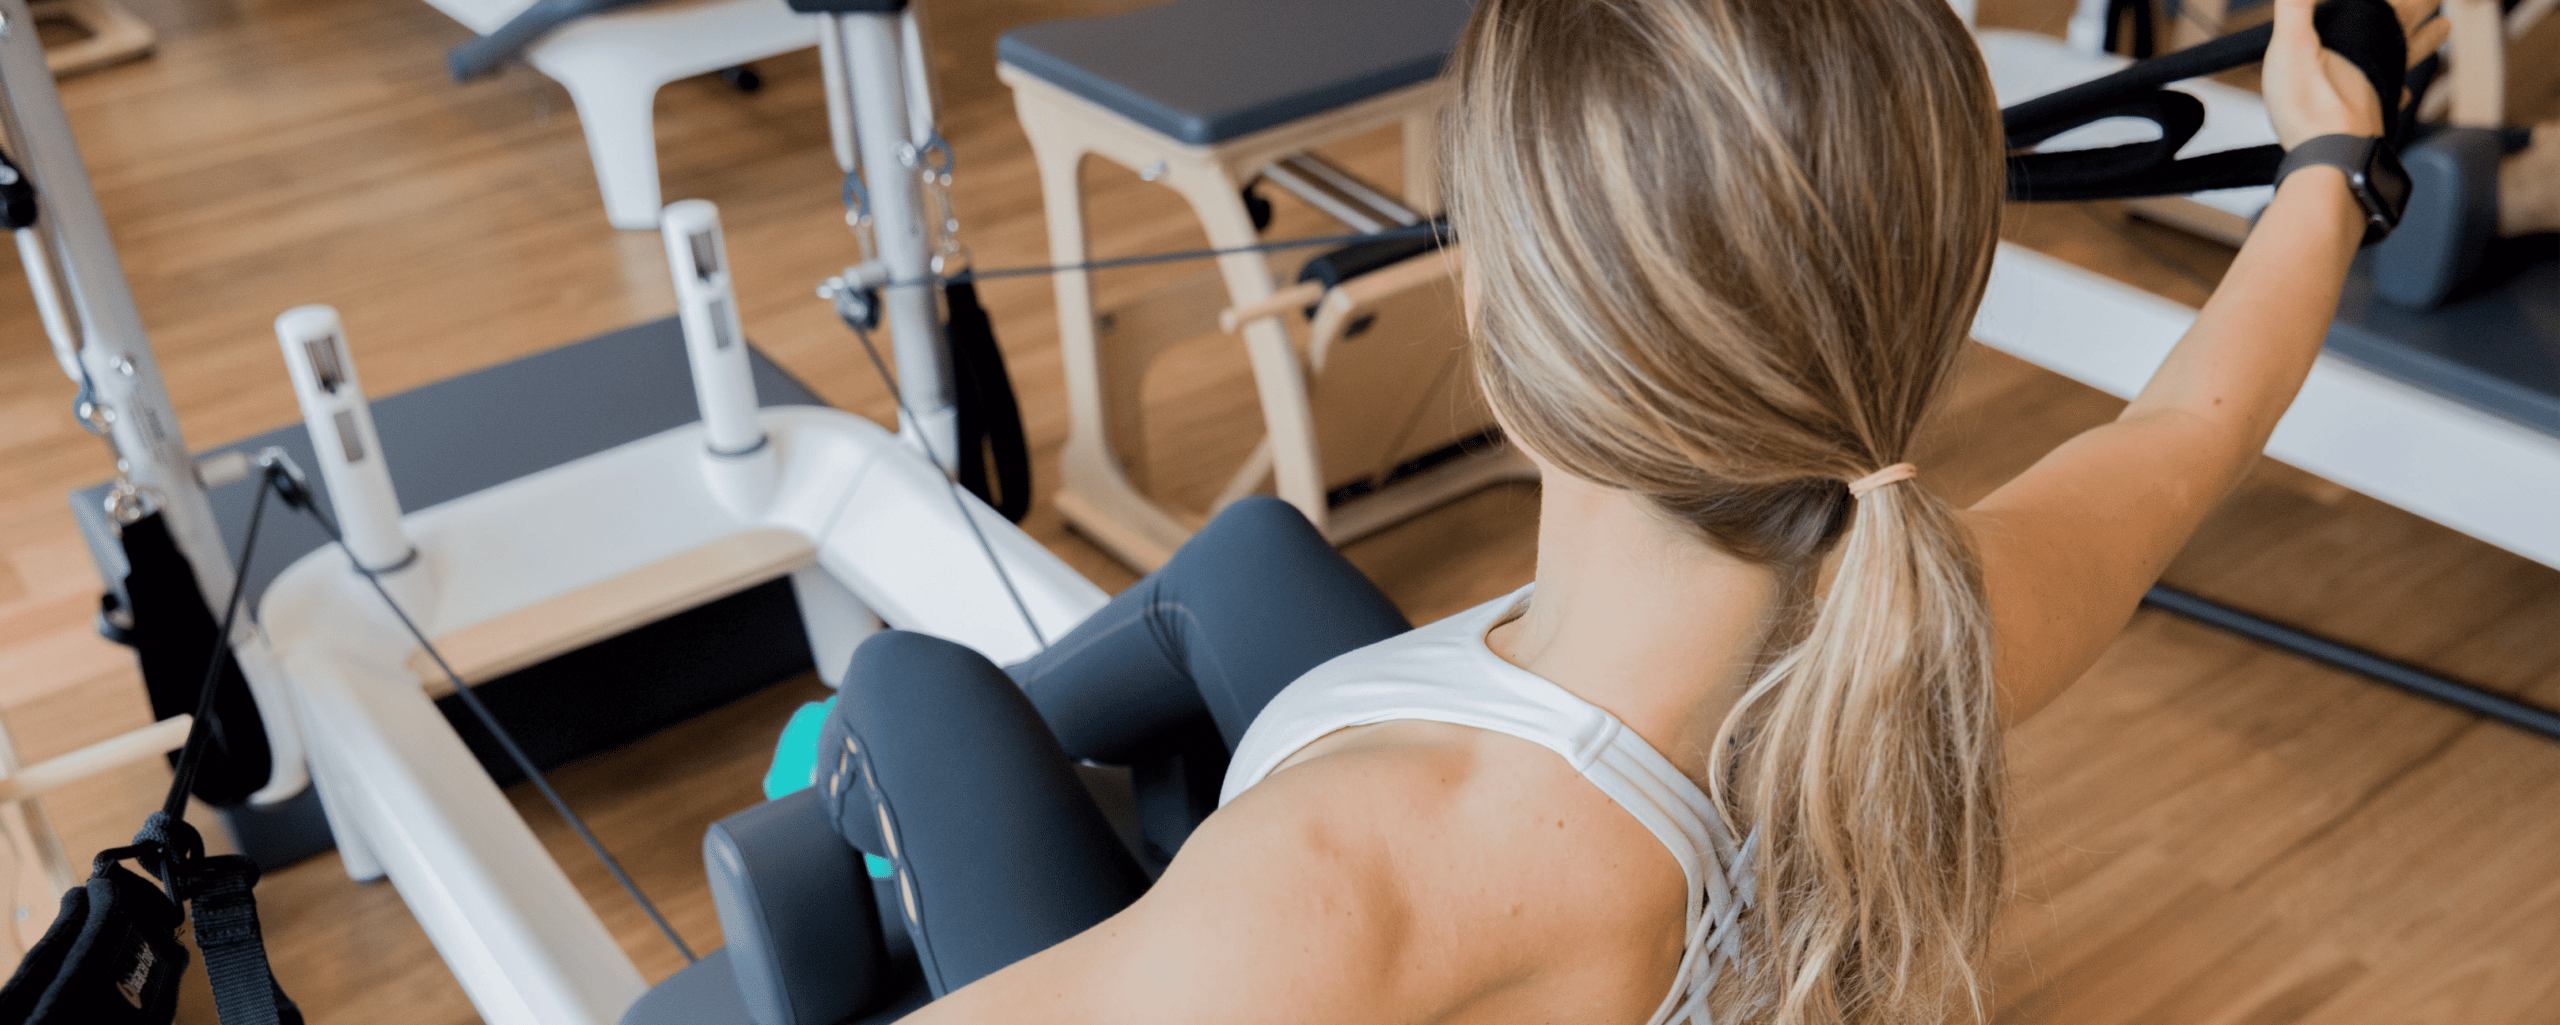 GREATEST Pilates Bar Sale EVER! - Stretched Fusion